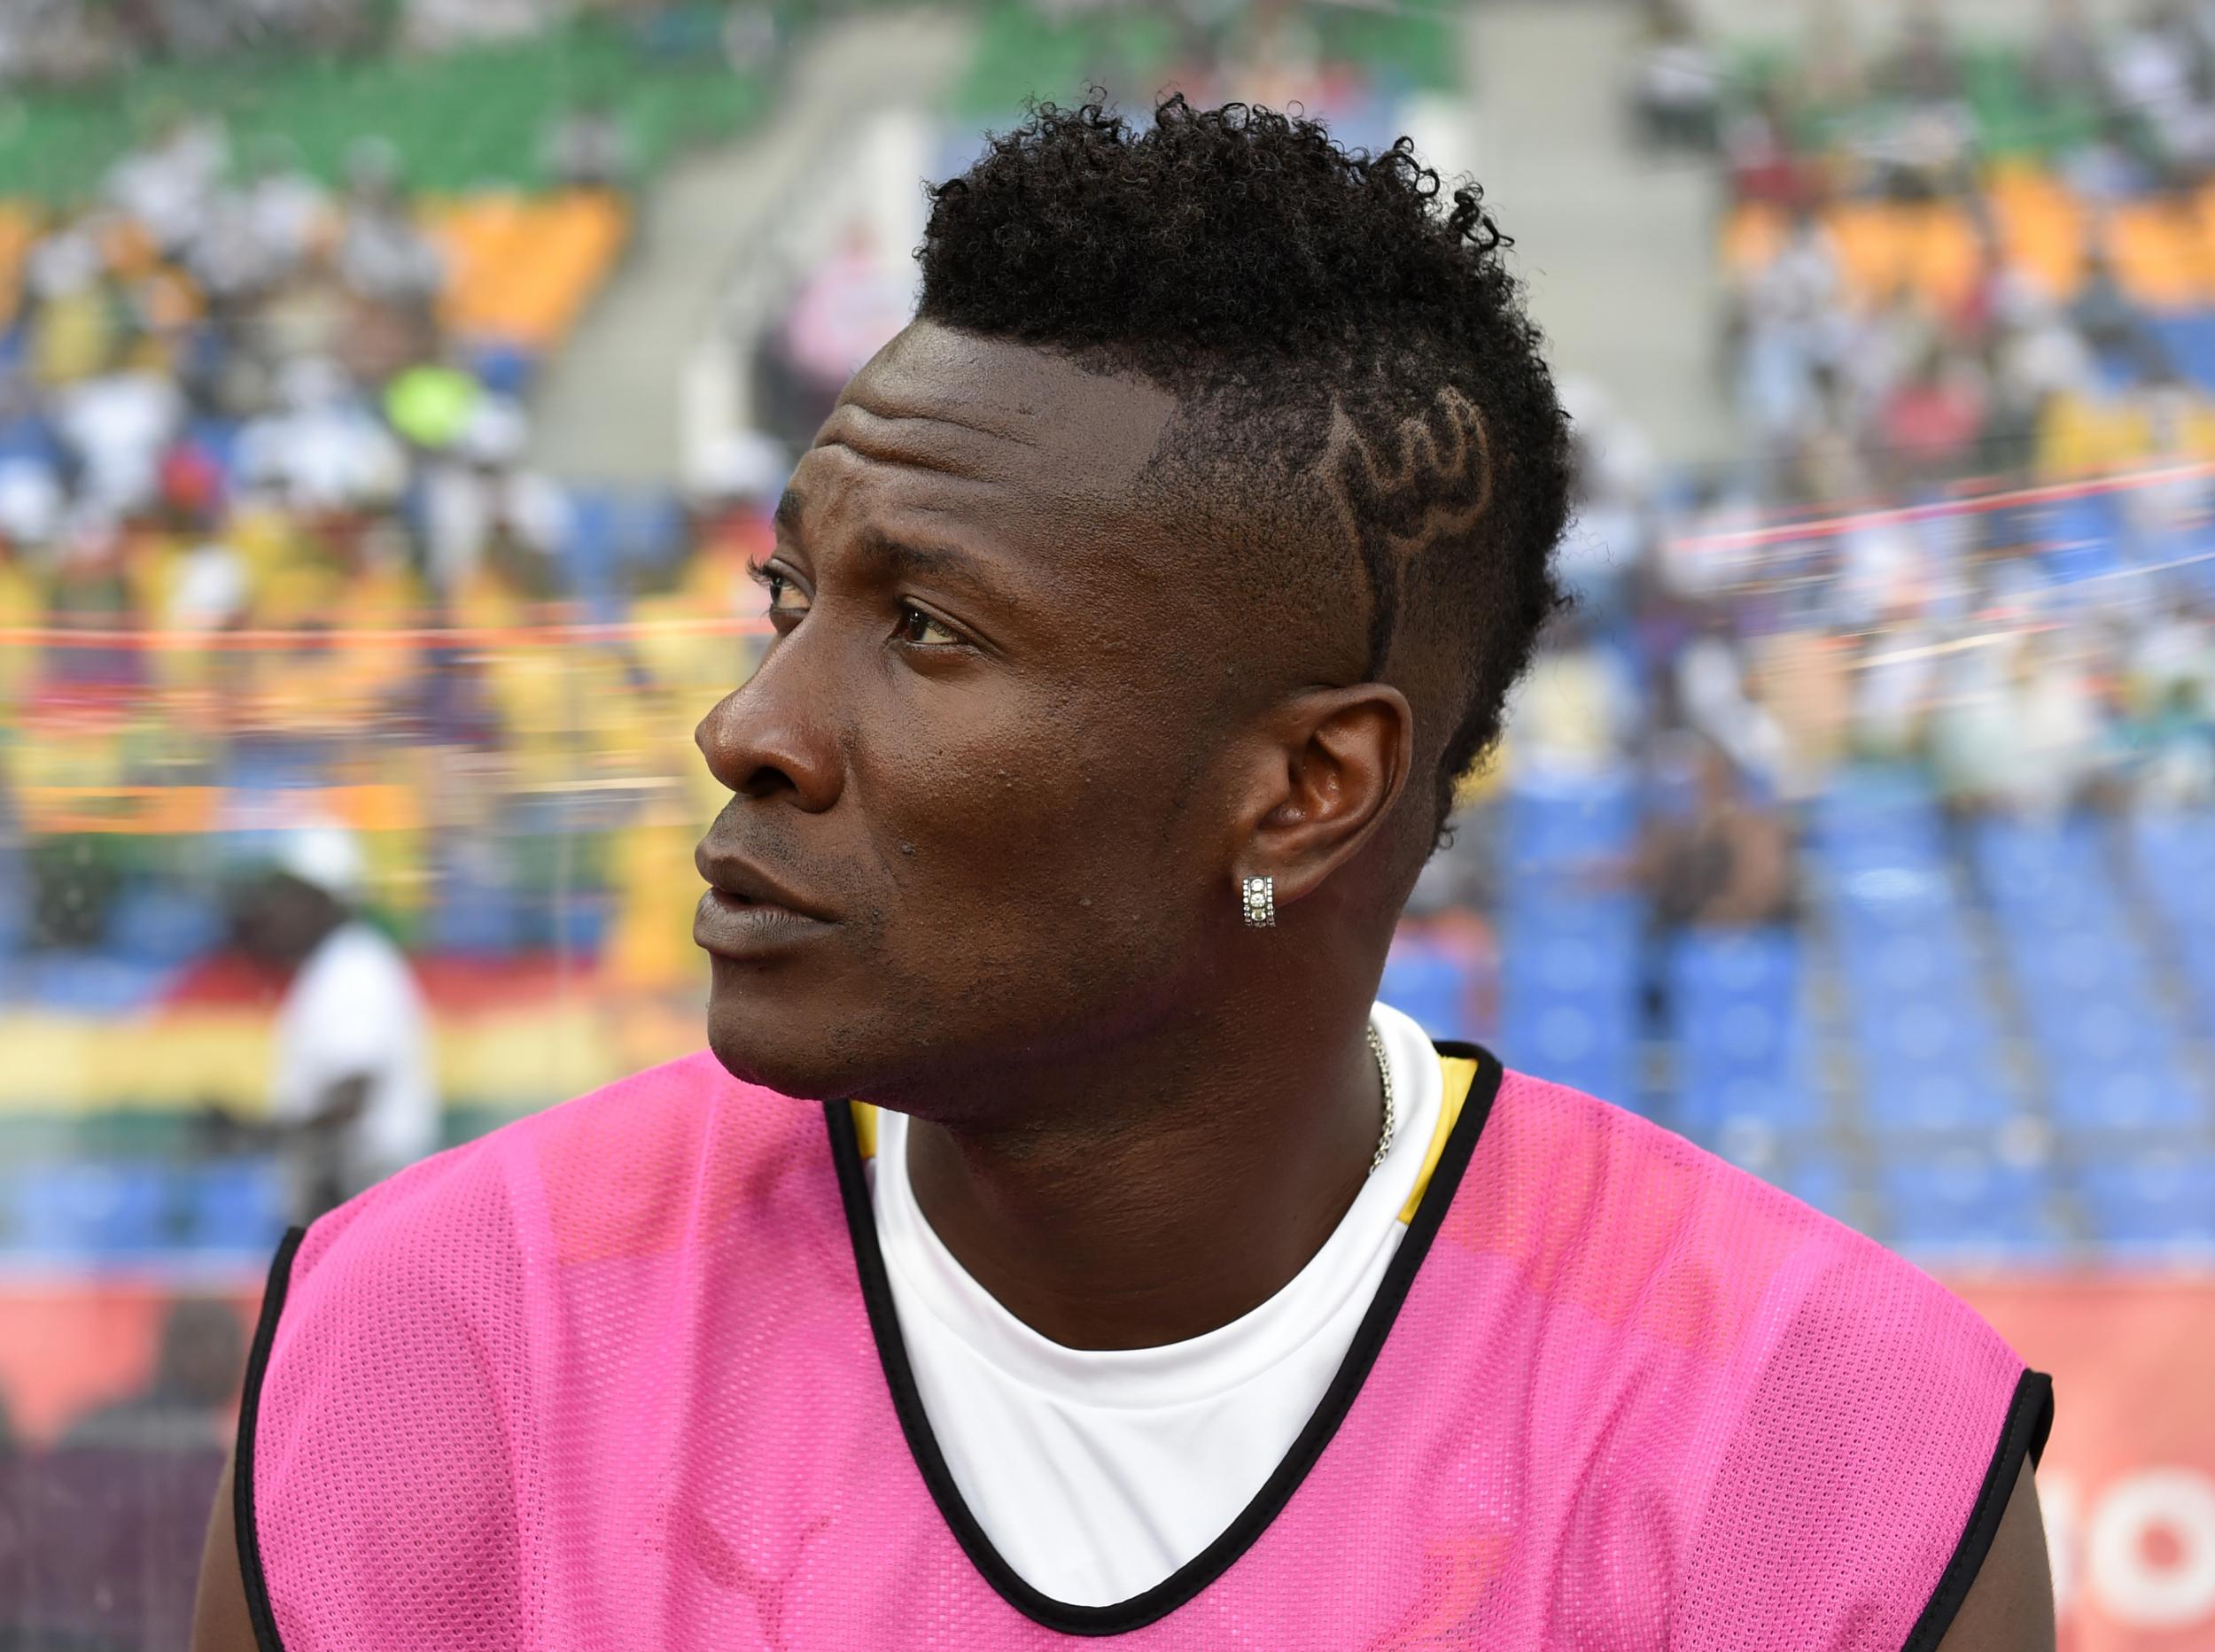 Gyan's mohawk has landed him in hot water with the UAE FA